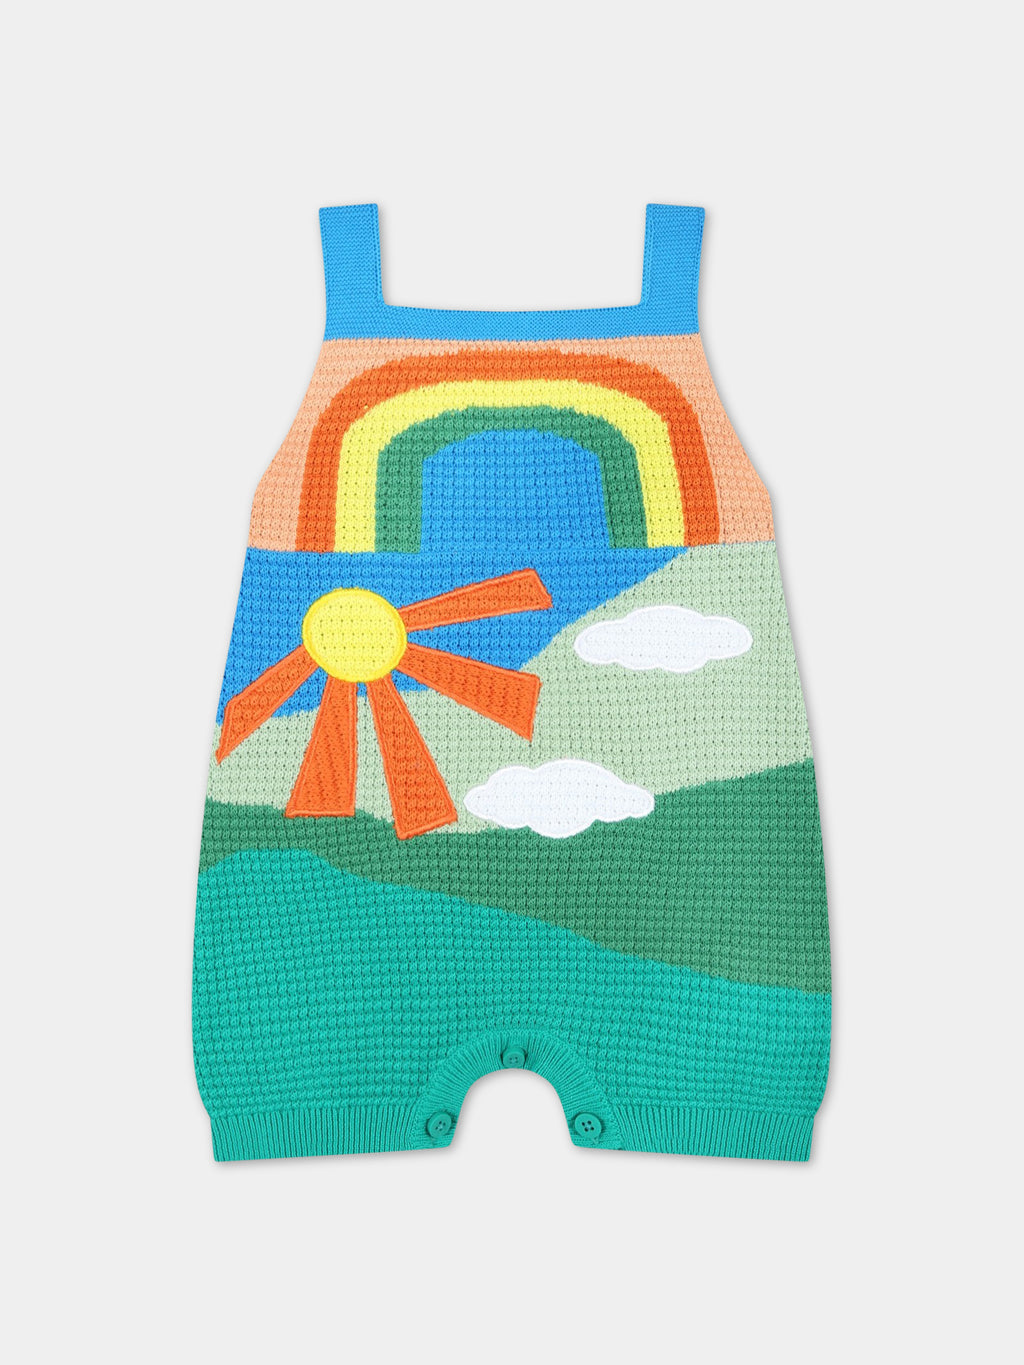 Multicolor dungarees for baby girl with sun and clouds